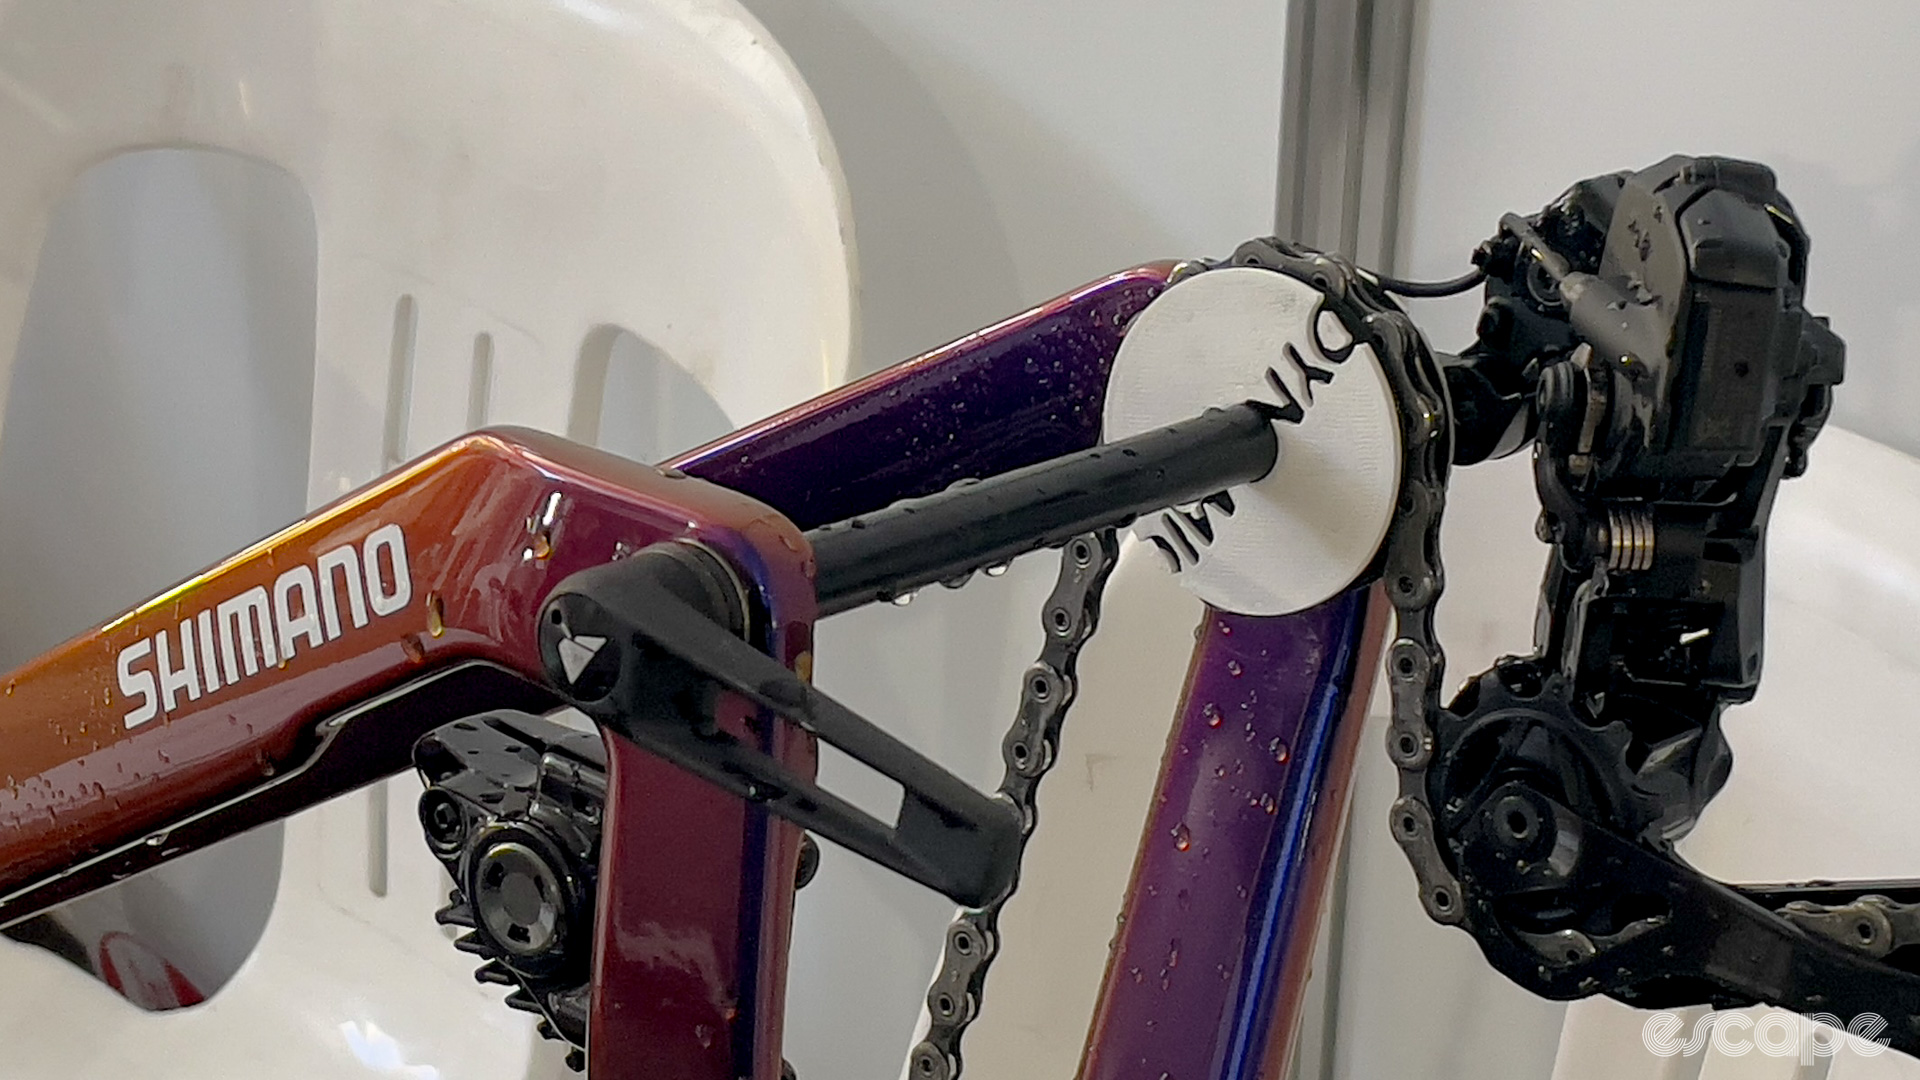 The photo shows a chain keeper attached to a Canyon bike to prevent the chain rattling in transit. 